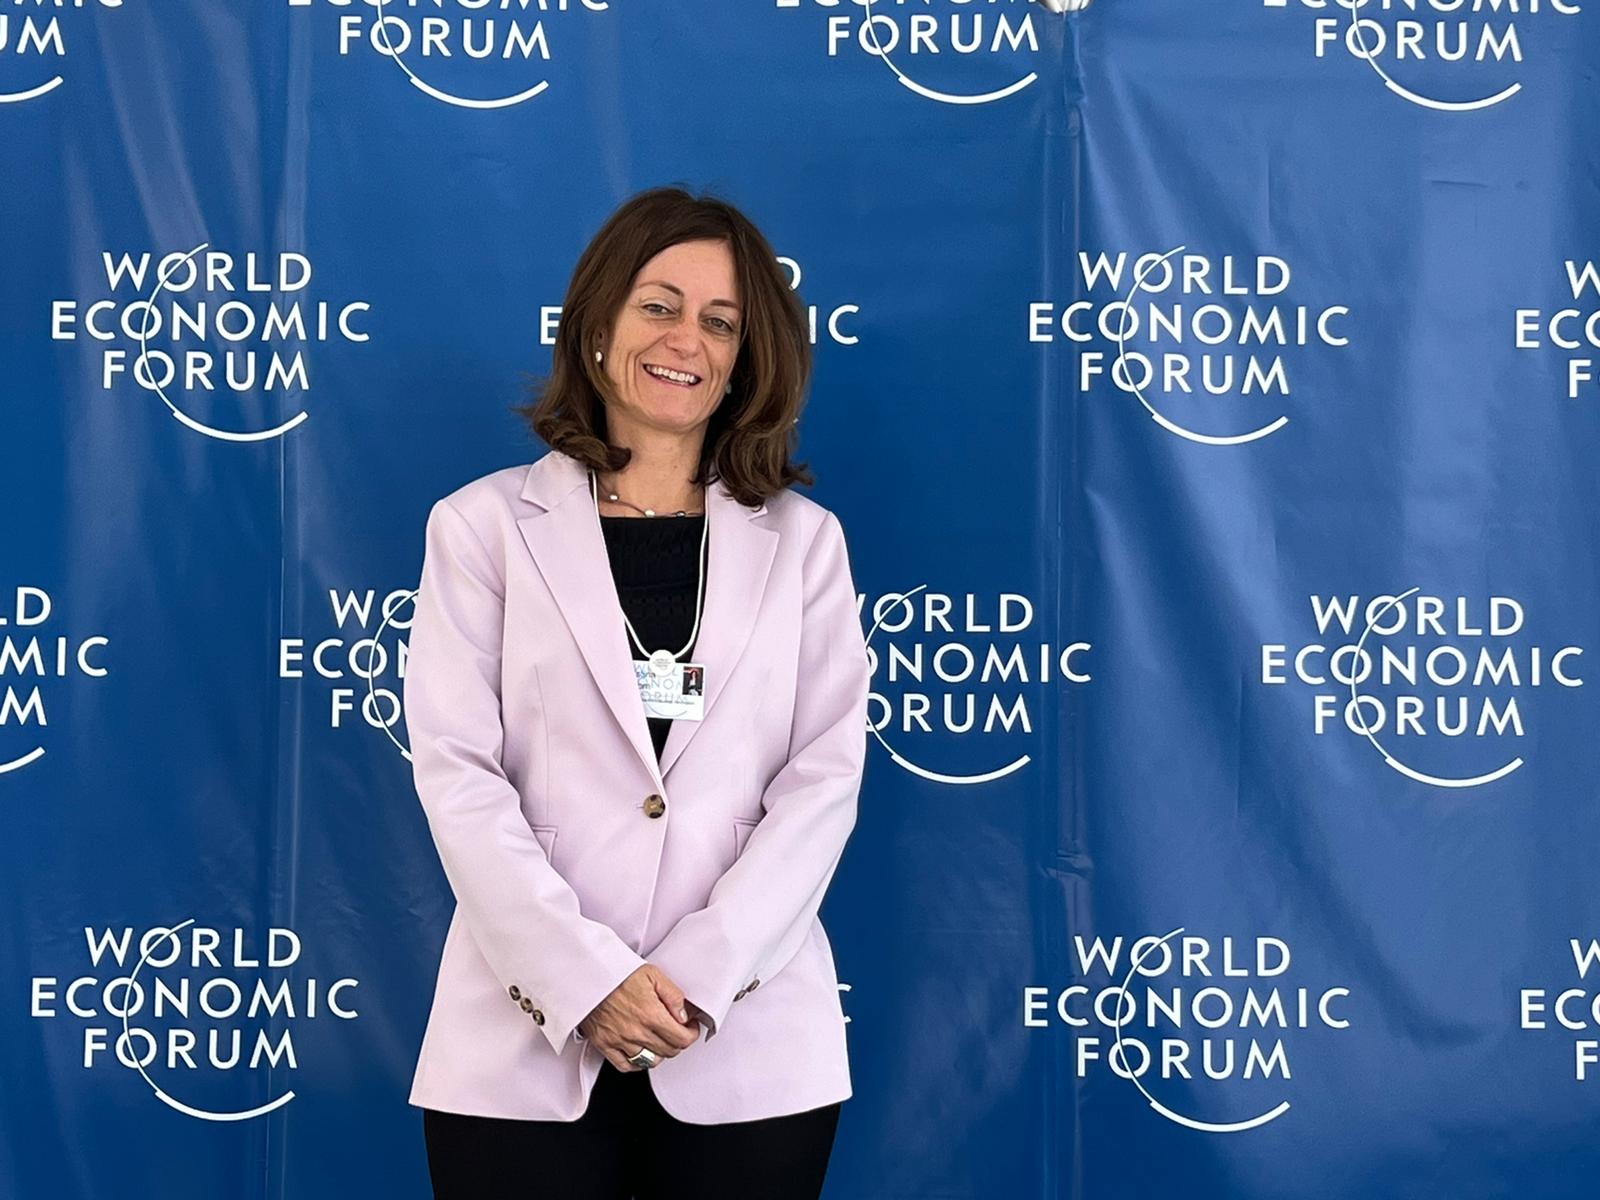 Digital Future Society participates in the annual meeting on technological governance of the World Economic Forum in San Francisco